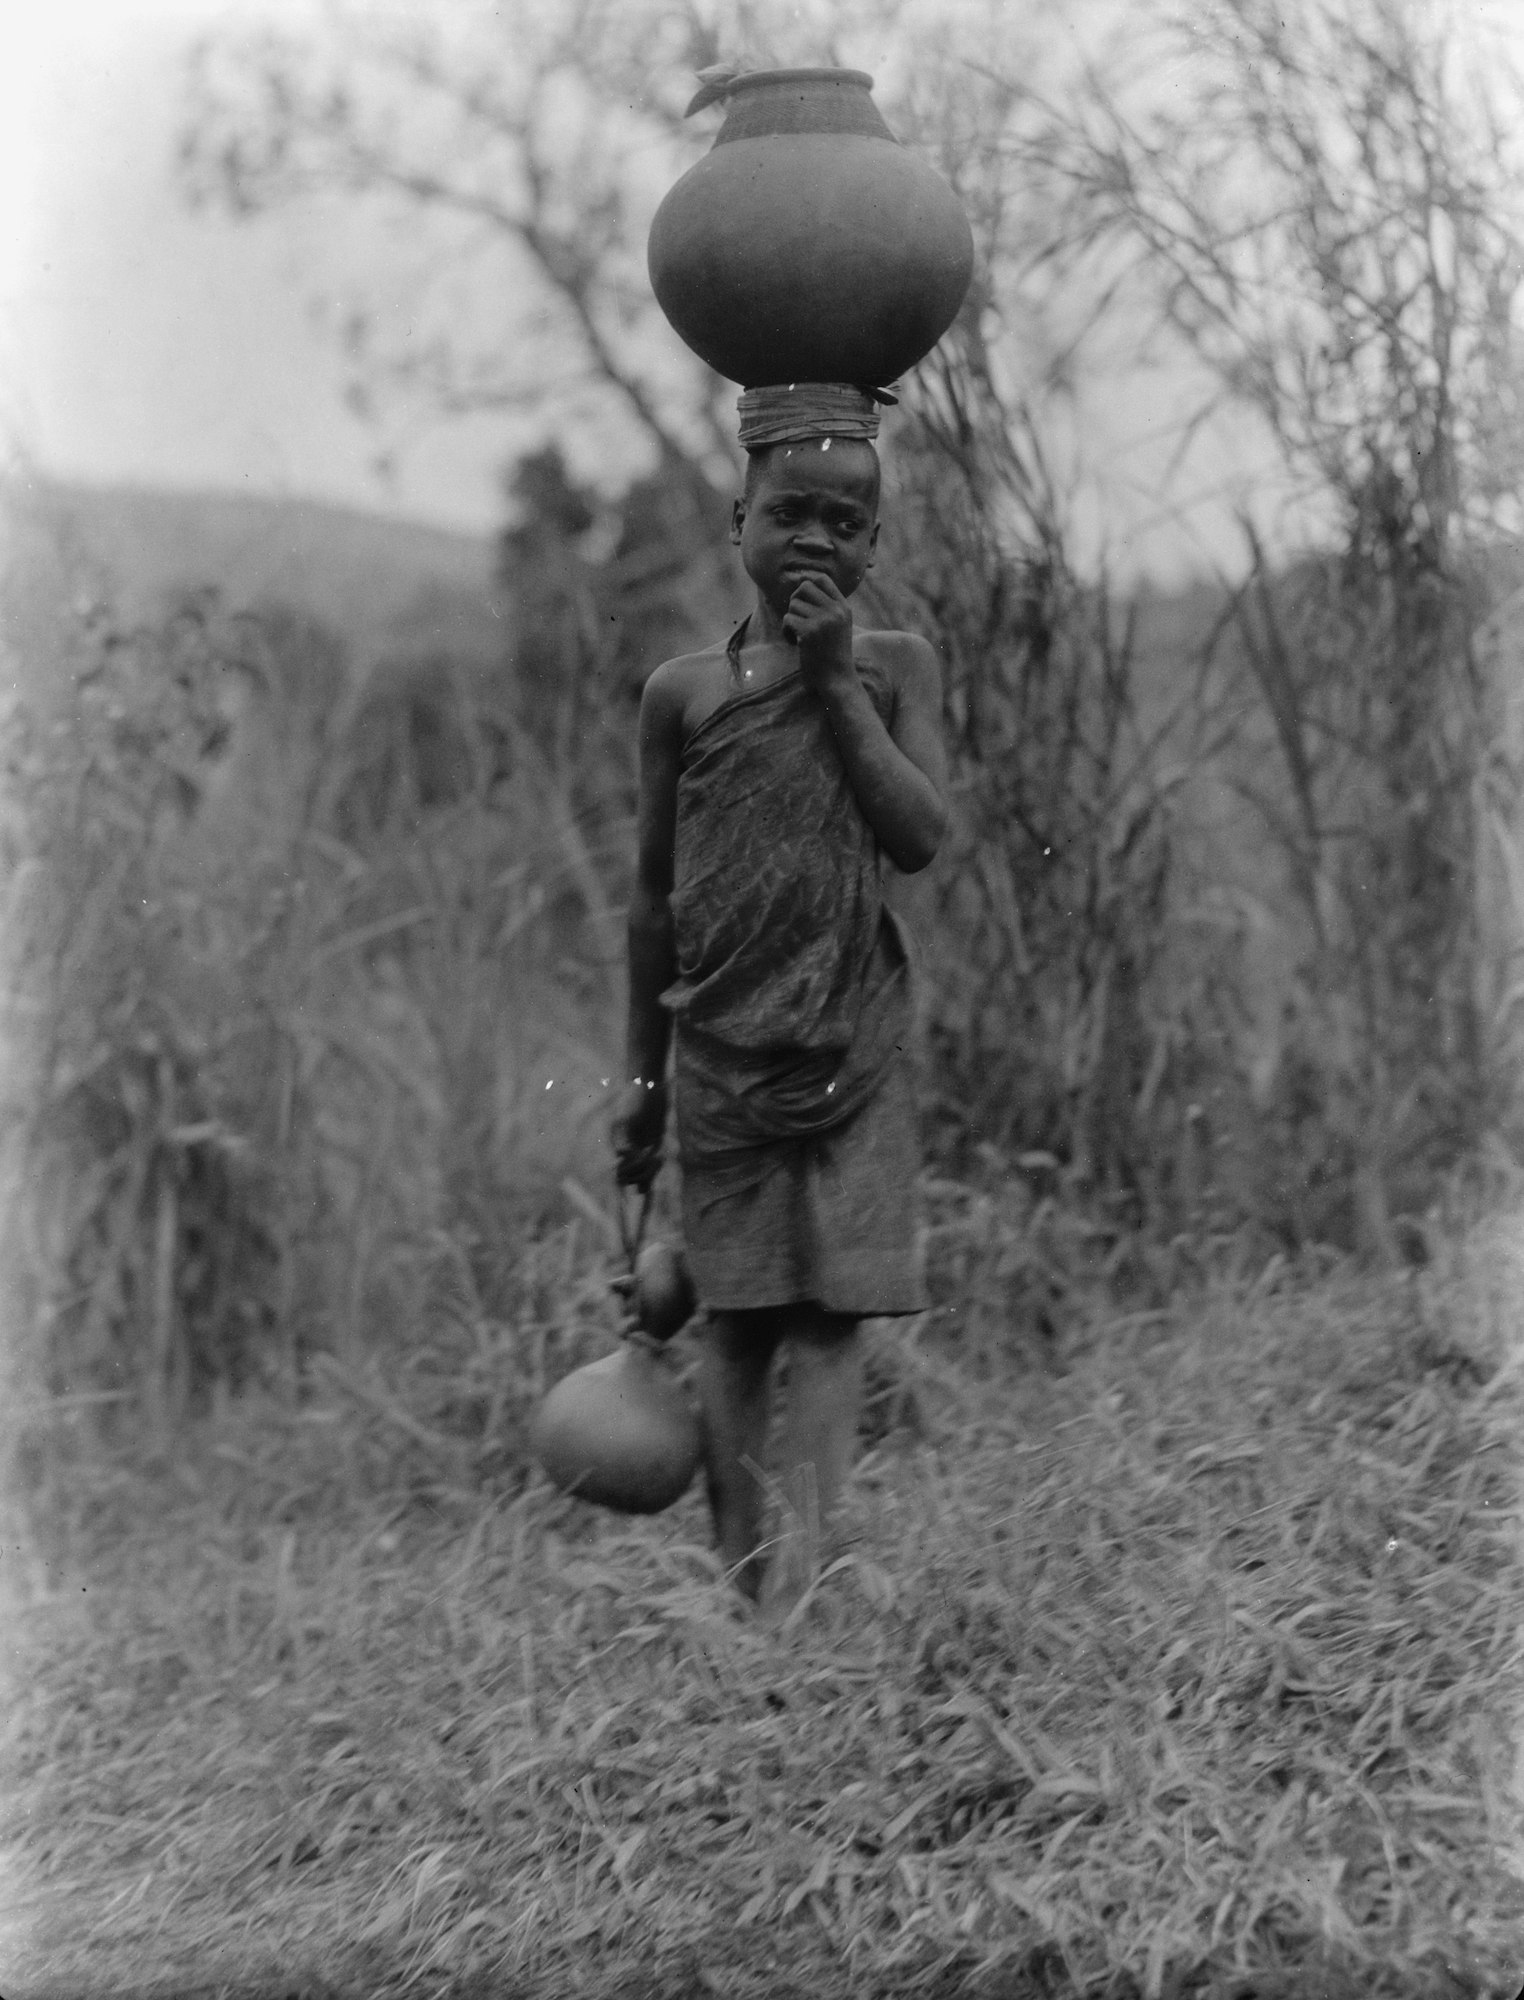 Black and white photo of a young man carrying water jugs